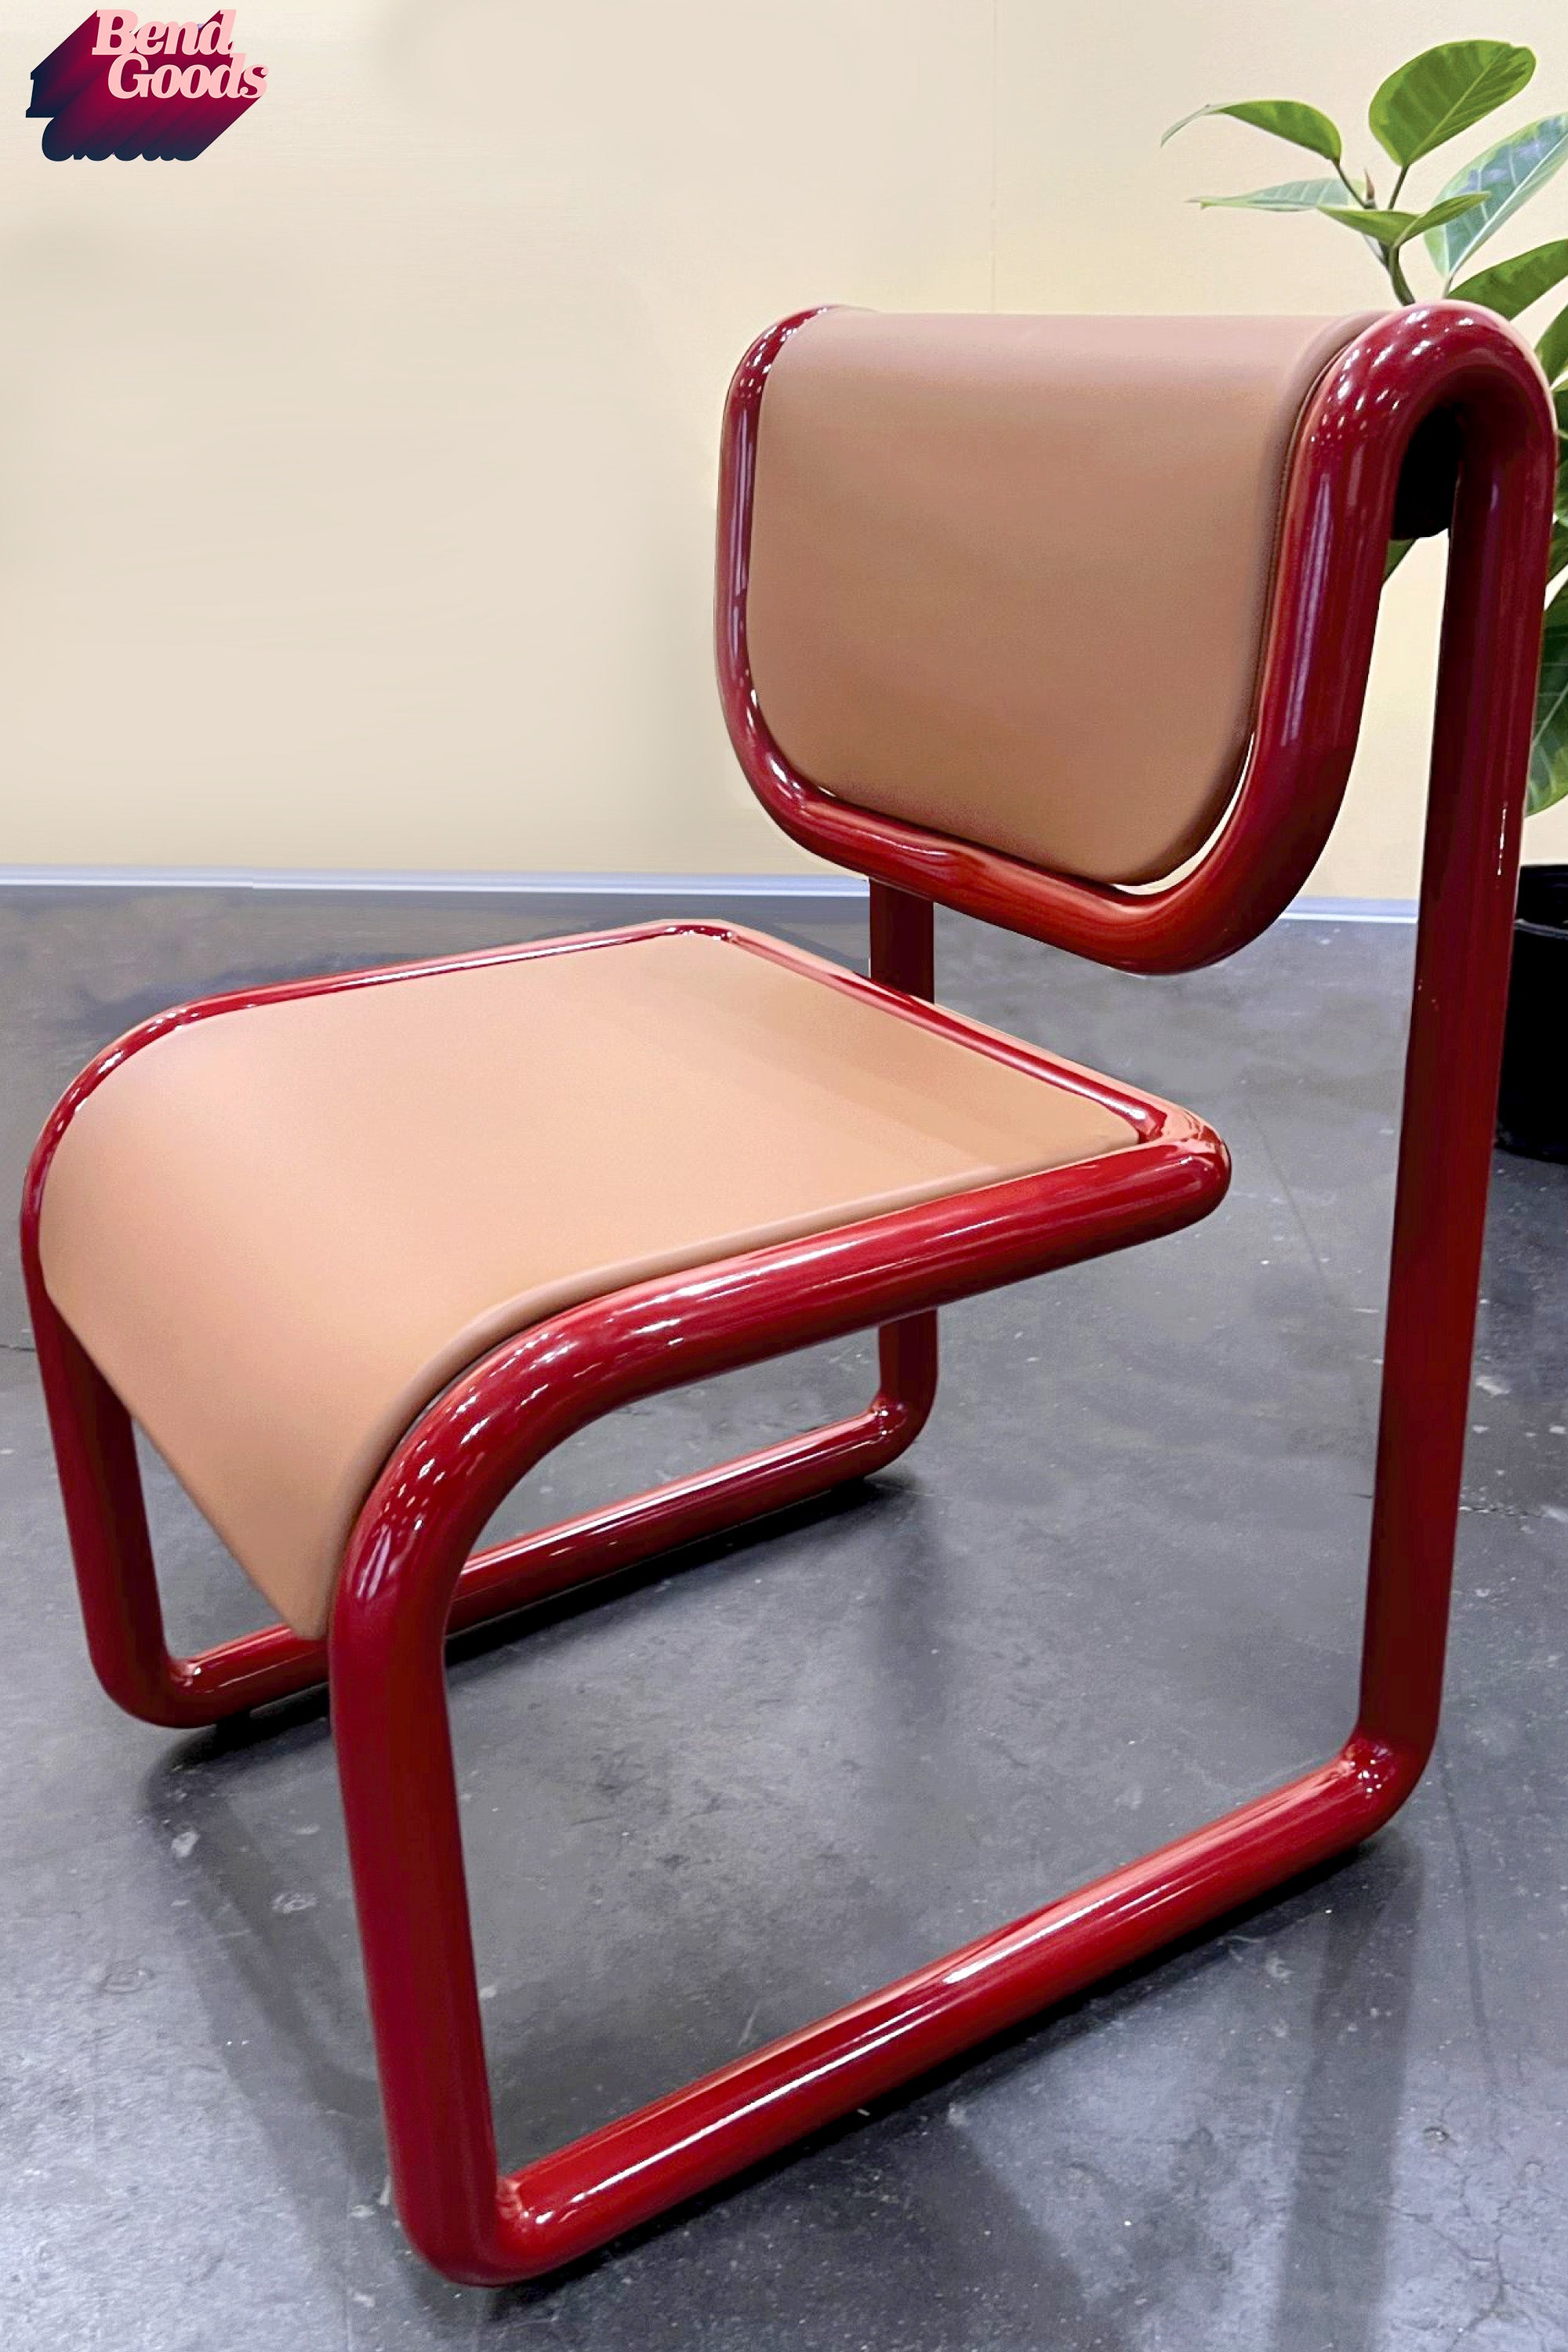 The Tube Chair our newest prototype,